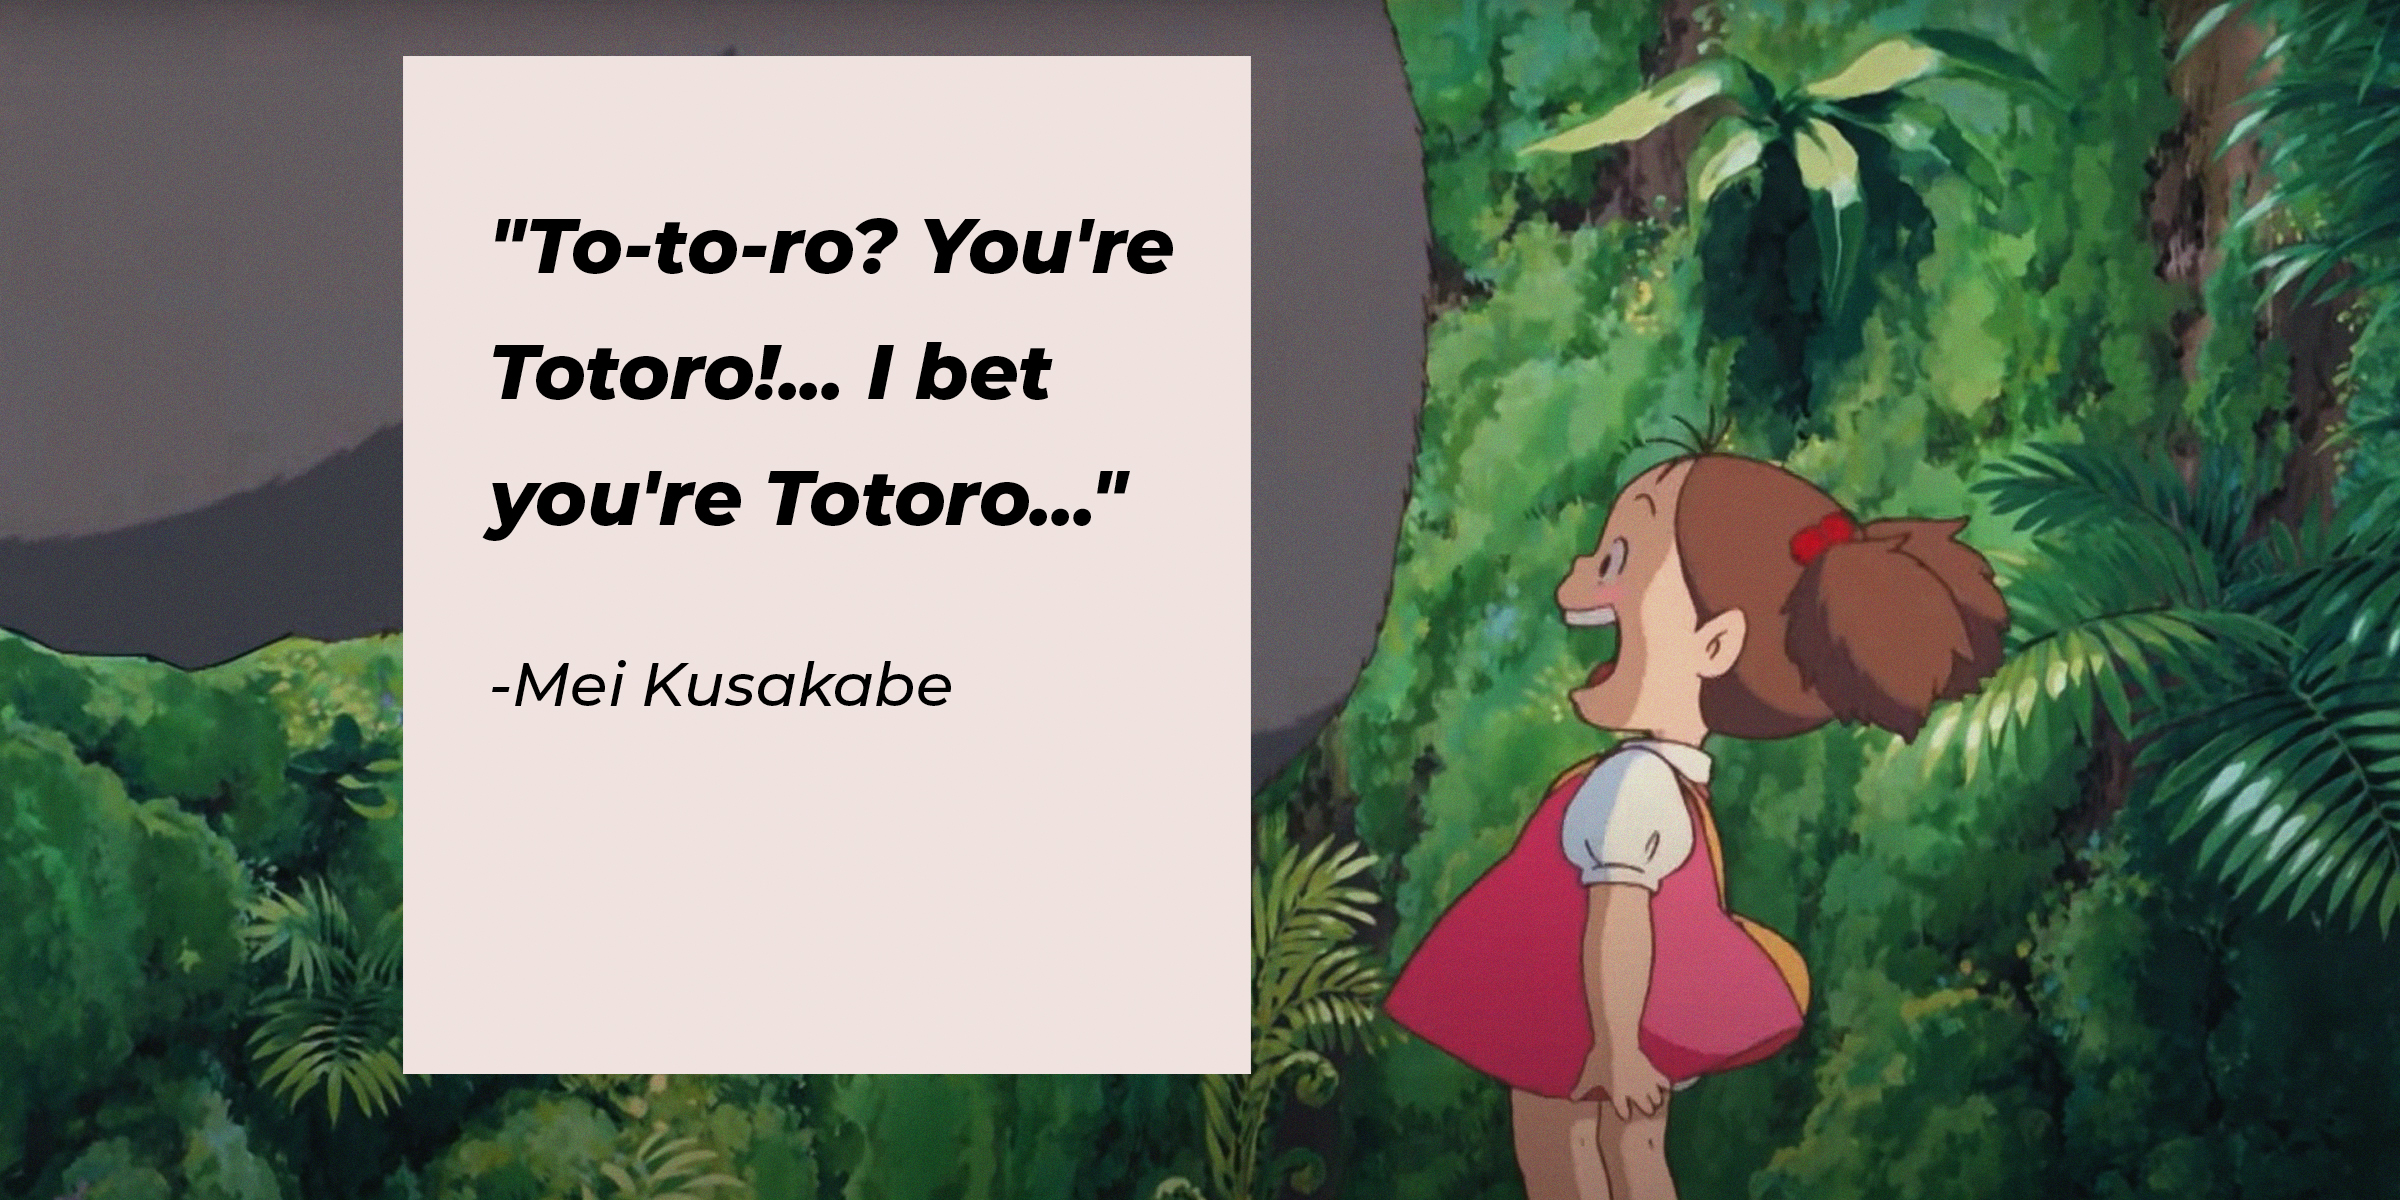 Photo of Mei Kusakabe with her quote: "To-to-ro? You're Totoro!... I bet you're Totoro..." | Source: Facebook.com/GhibliUSA